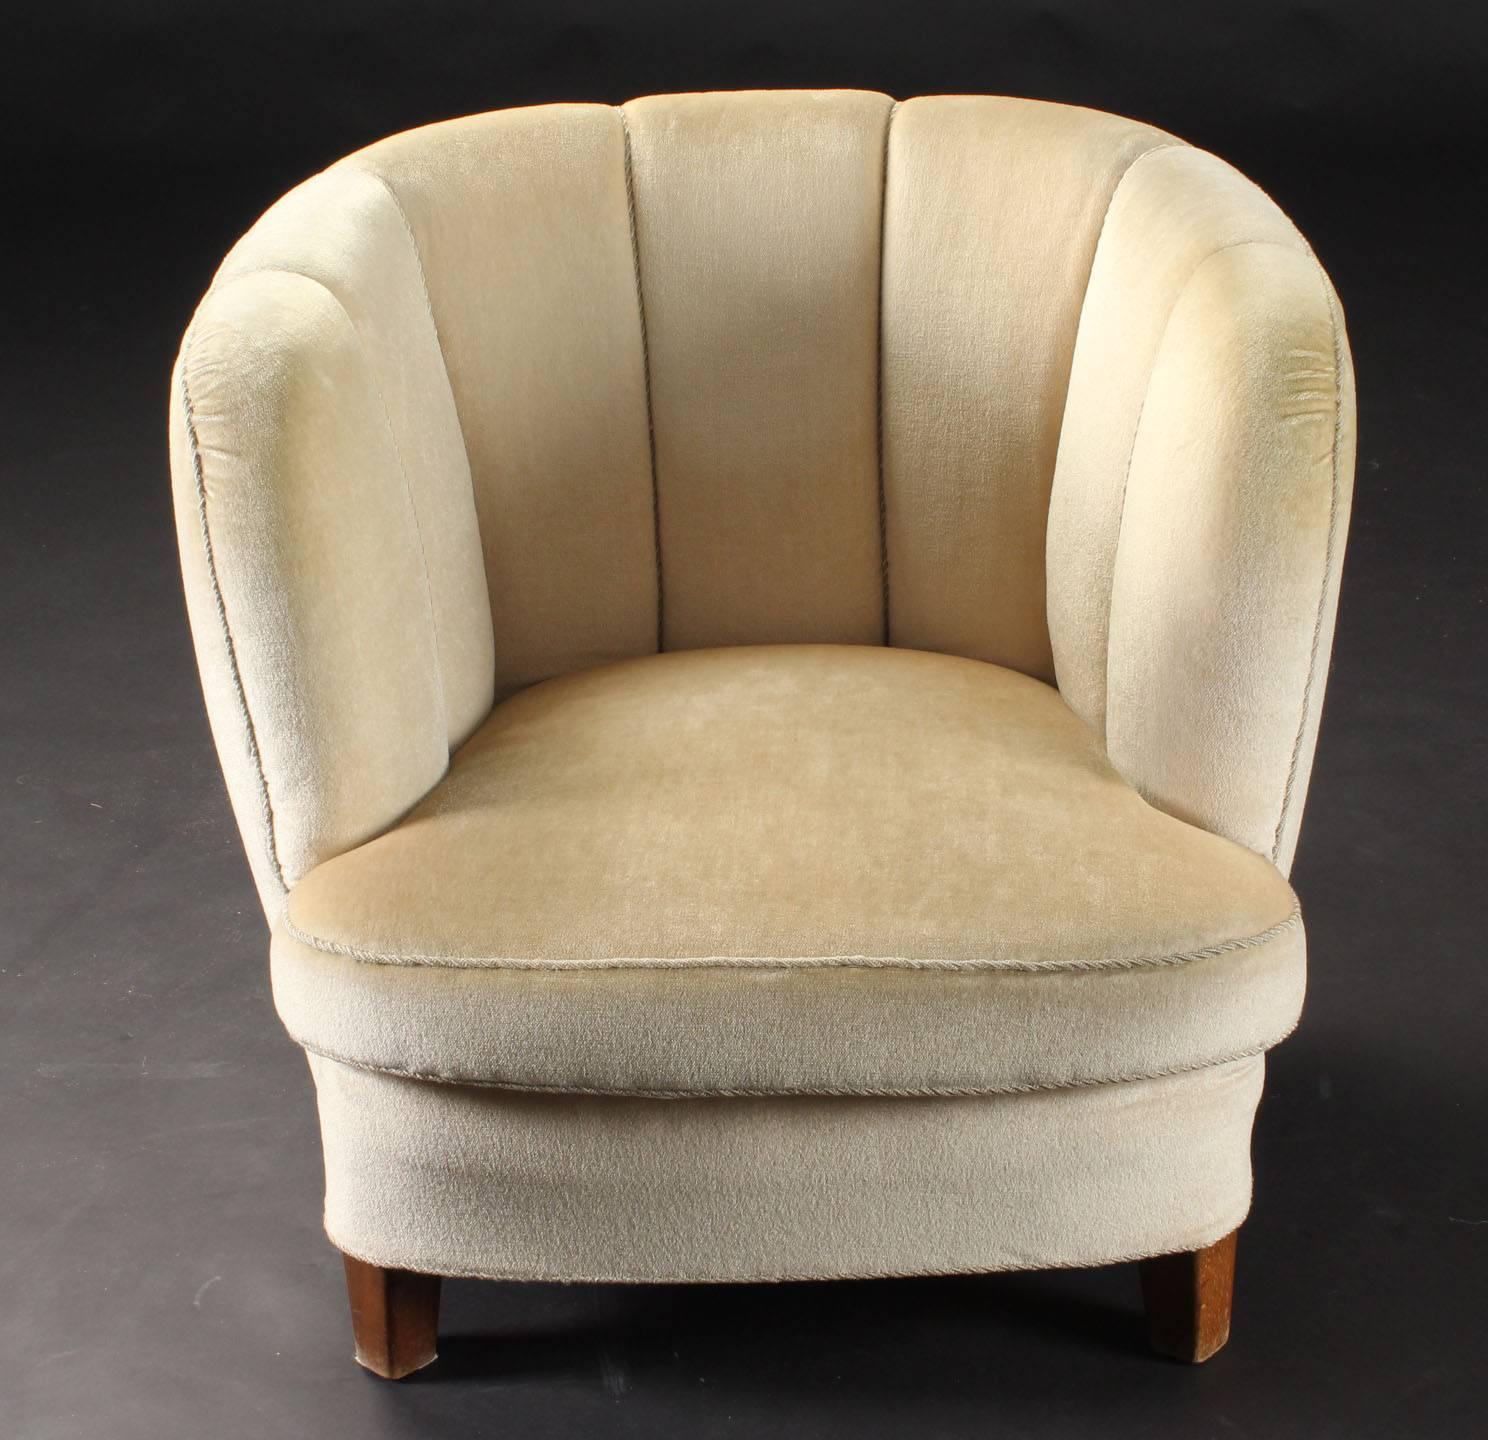 A low but comfortable armchair produced in Denmark in the 1940s. It is in it´s original condition with ivory mohair fabric. The legs are made of beech wood. See also the matching sofa and wingback in similar form and fabric.